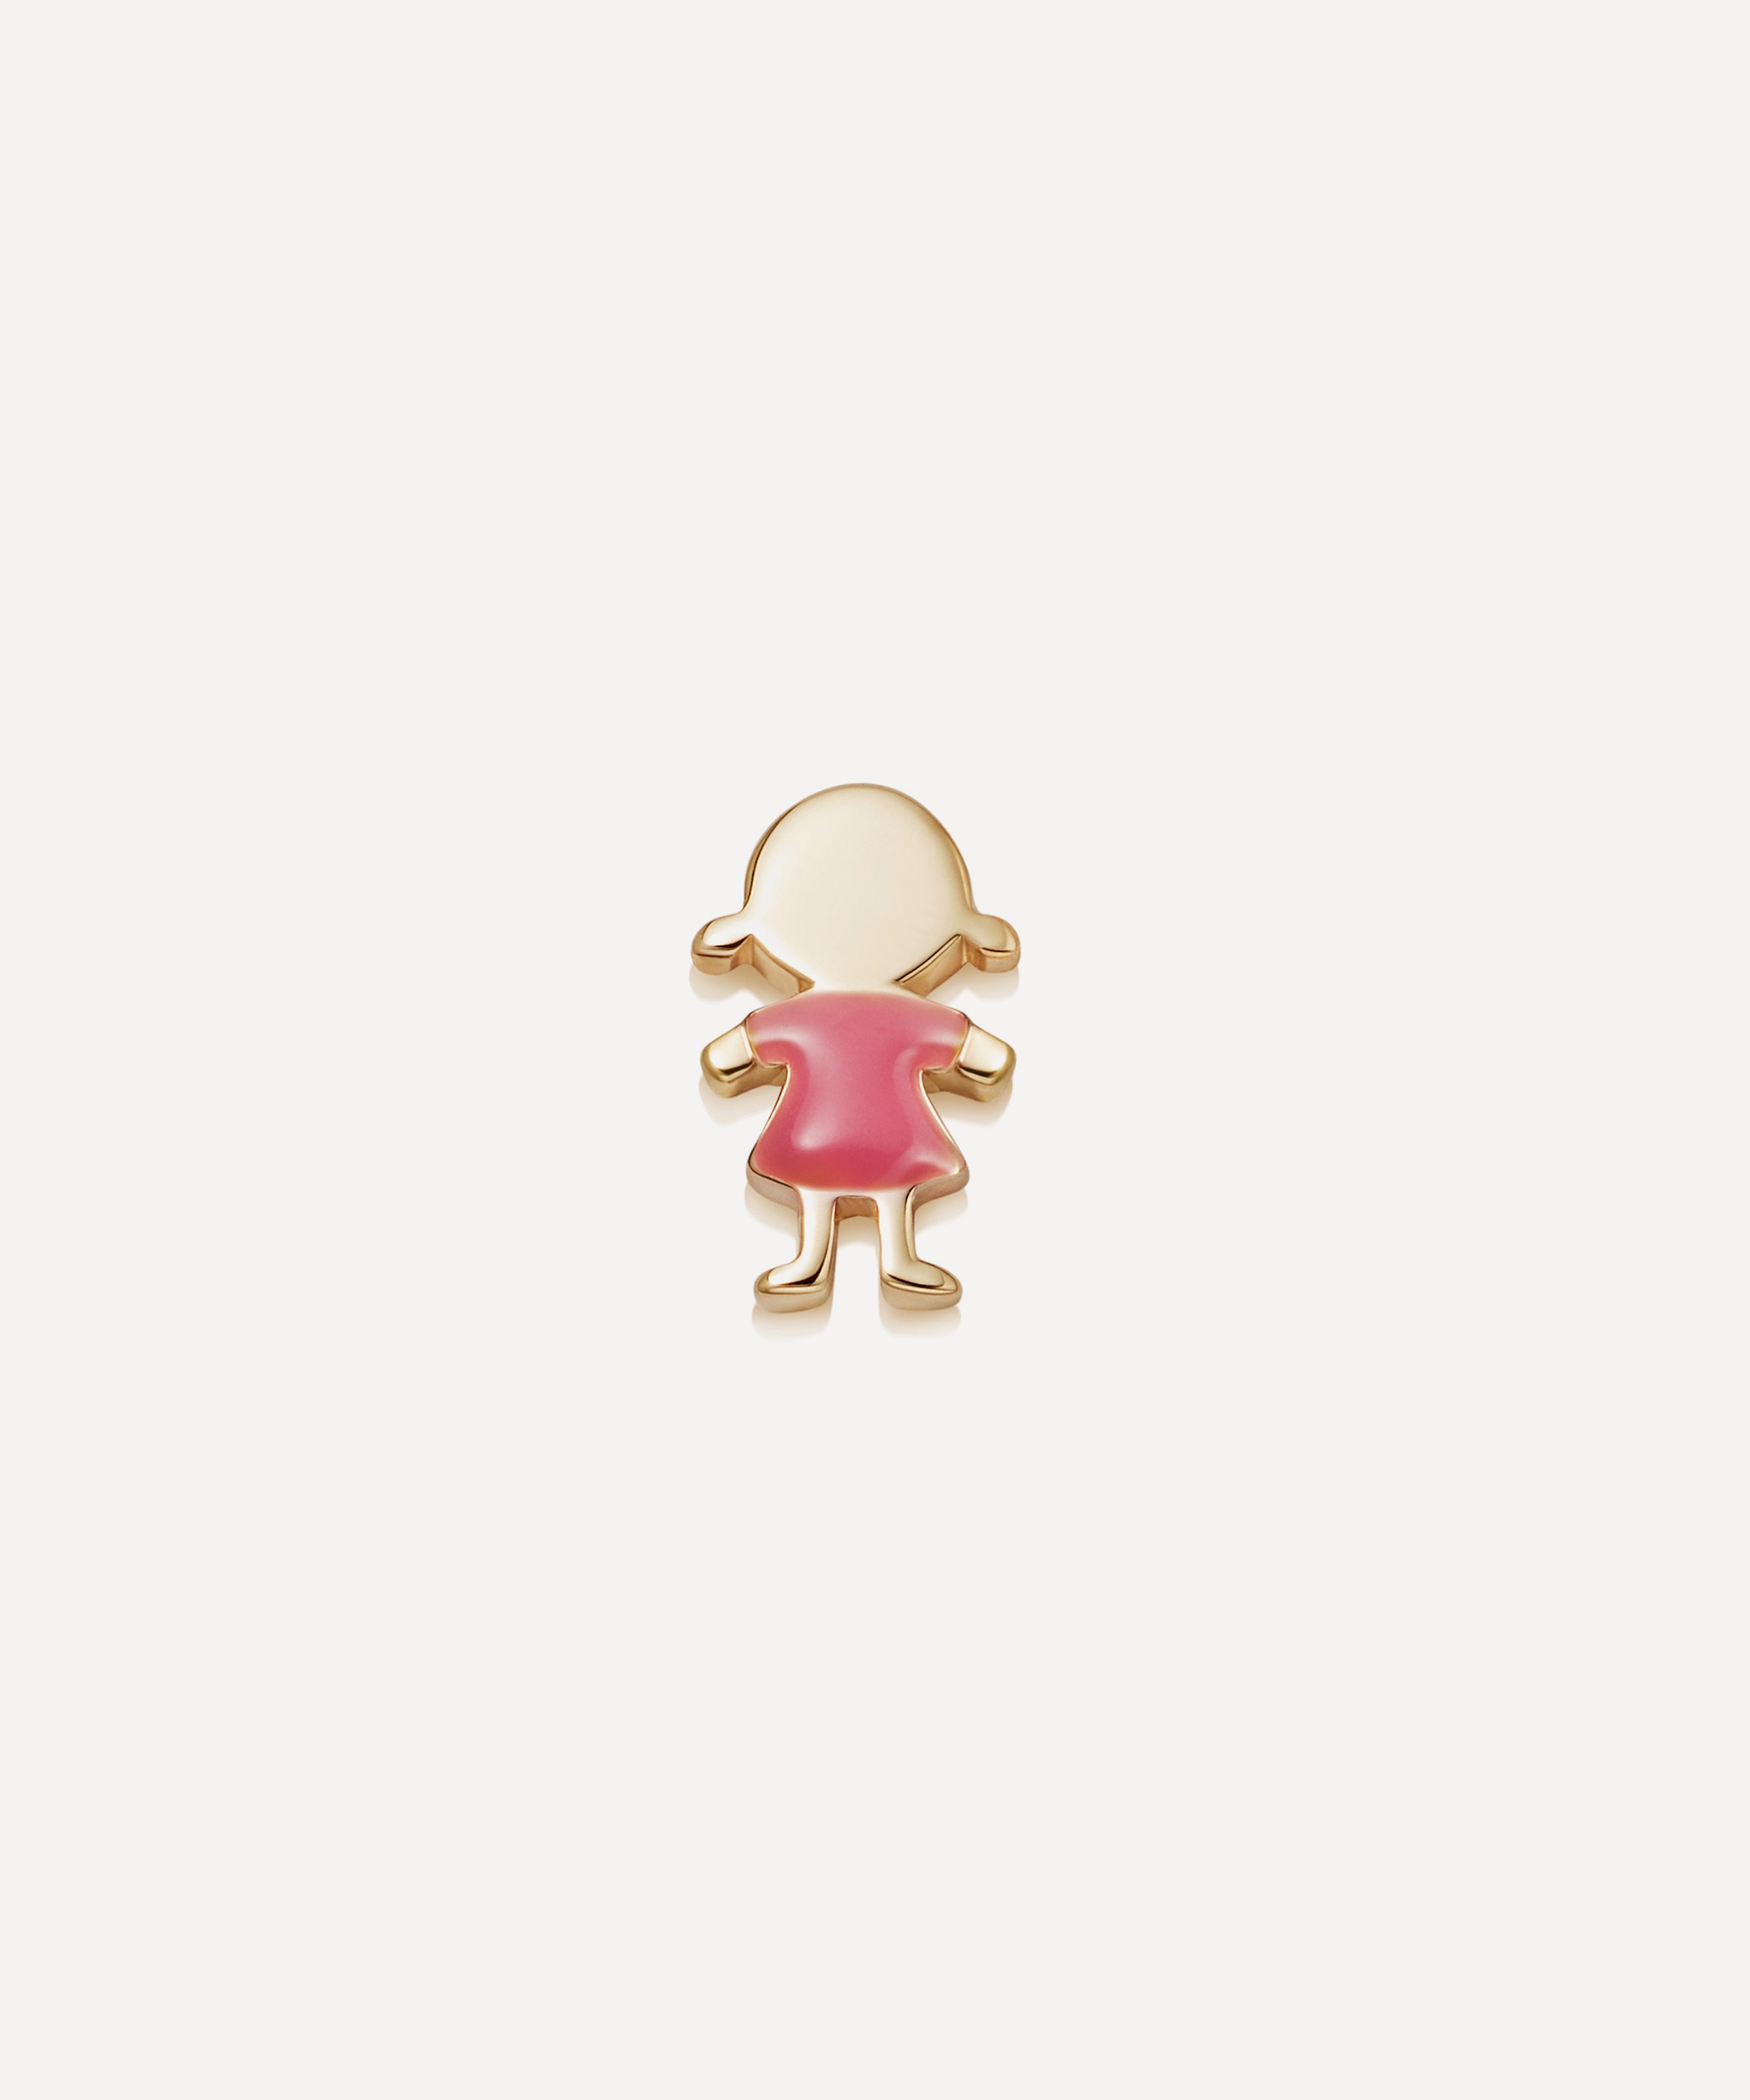 Loquet London - 18ct Gold Girl Charm image number 0